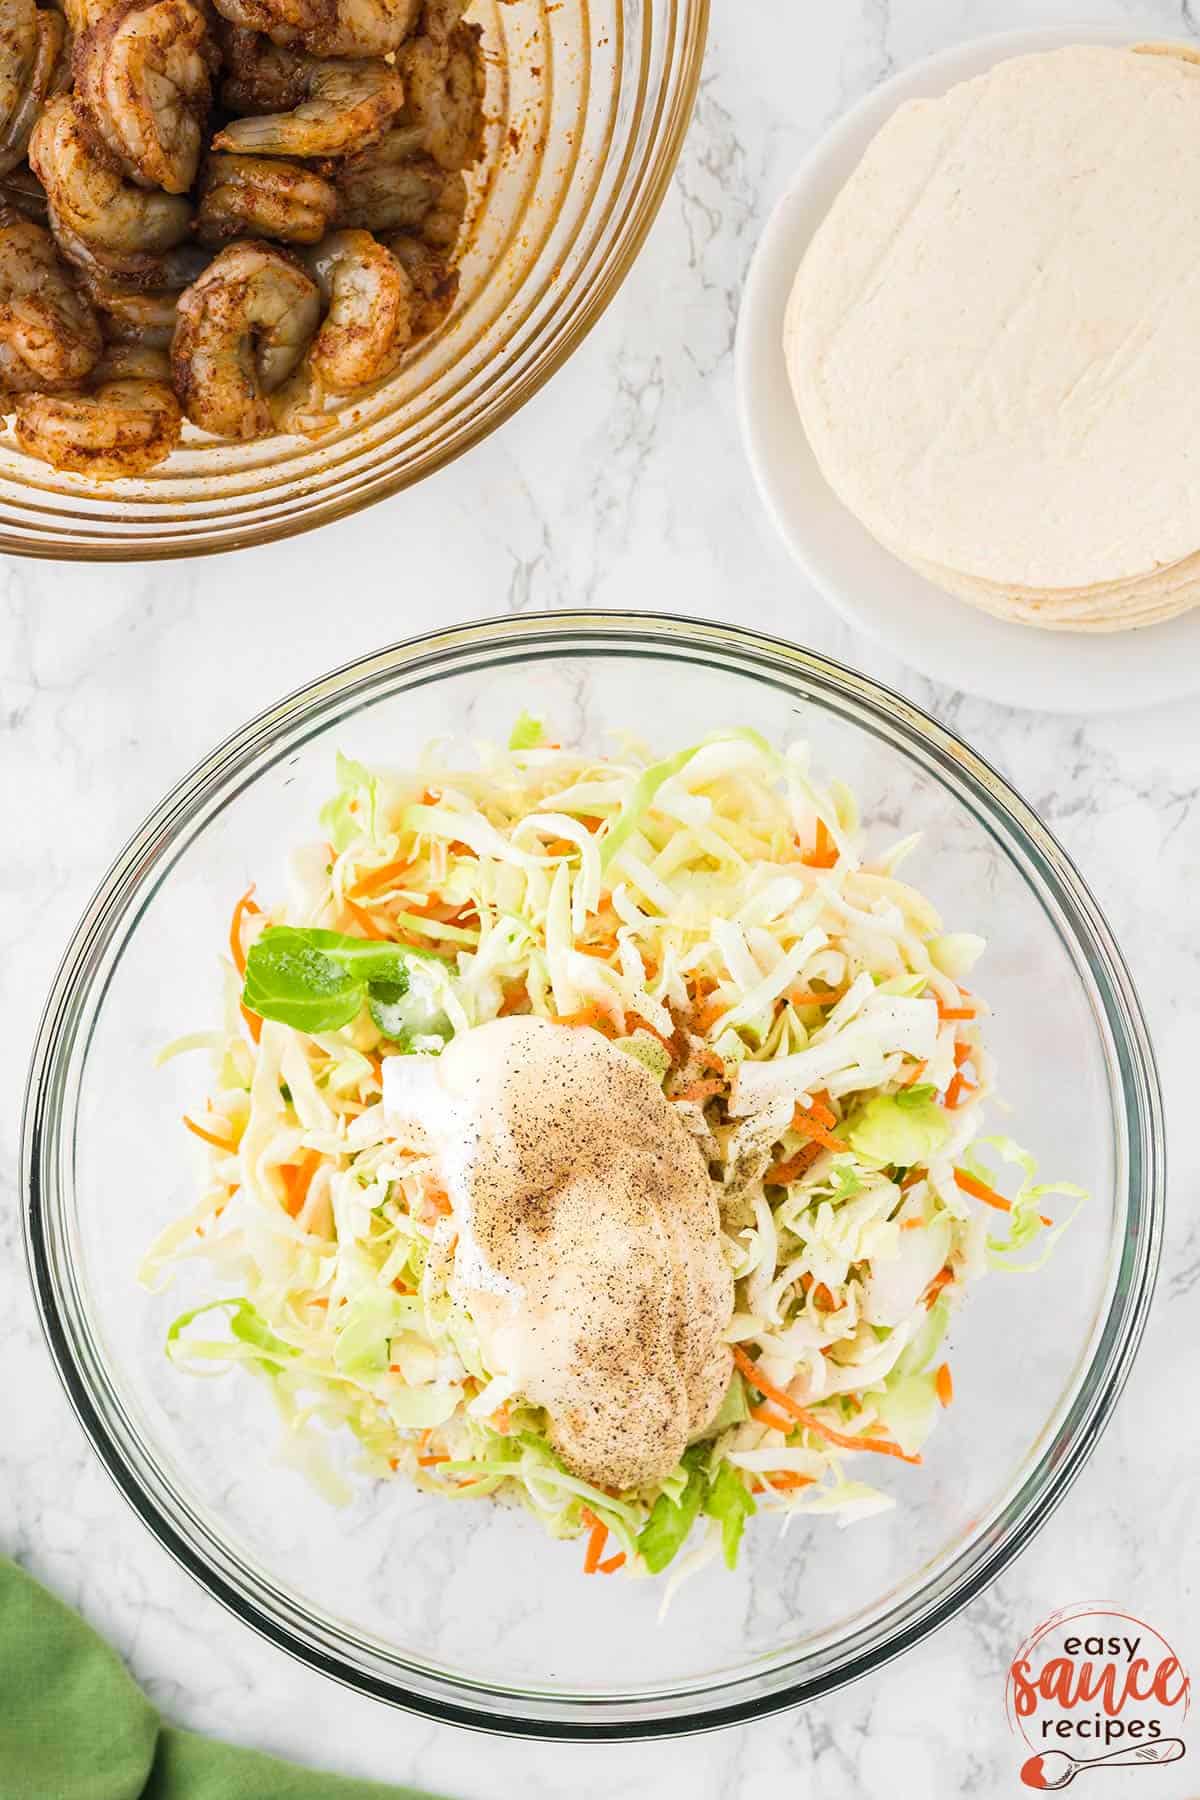 the dressing ingredients added on top of coleslaw mix in a bowl